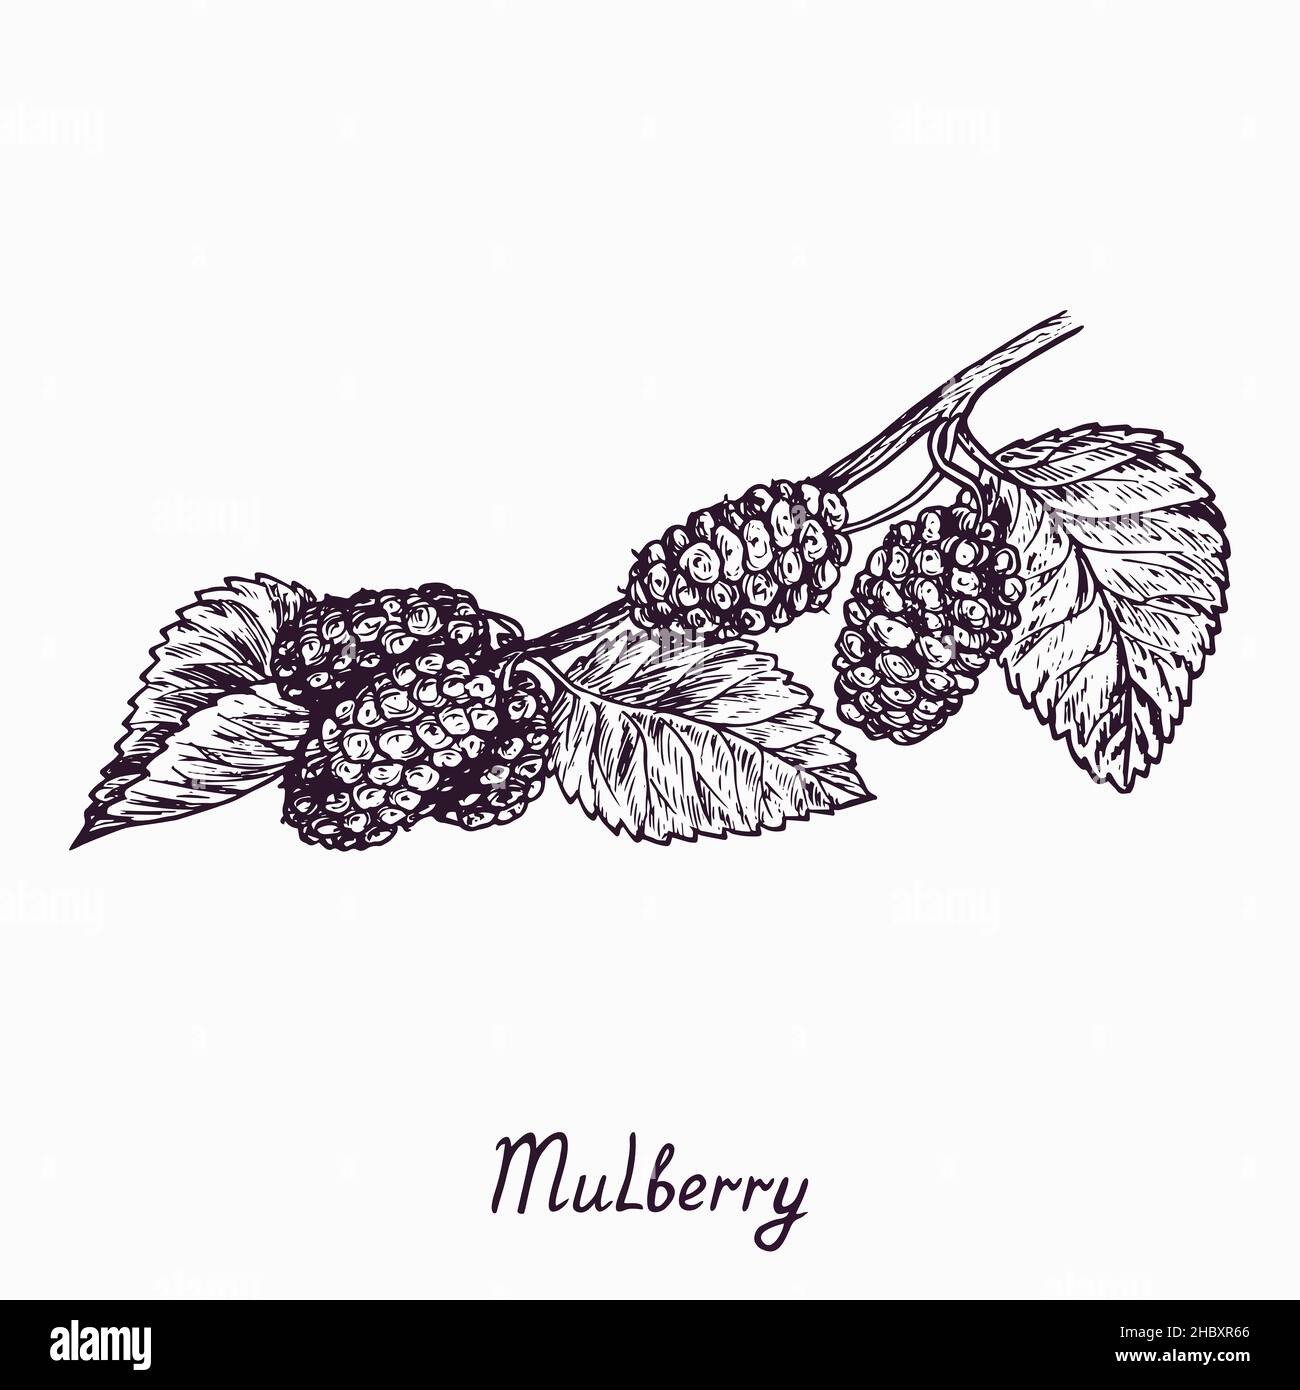 Mulberry branch with berries and leaves, simple doodle drawing with inscription, gravure style Stock Photo